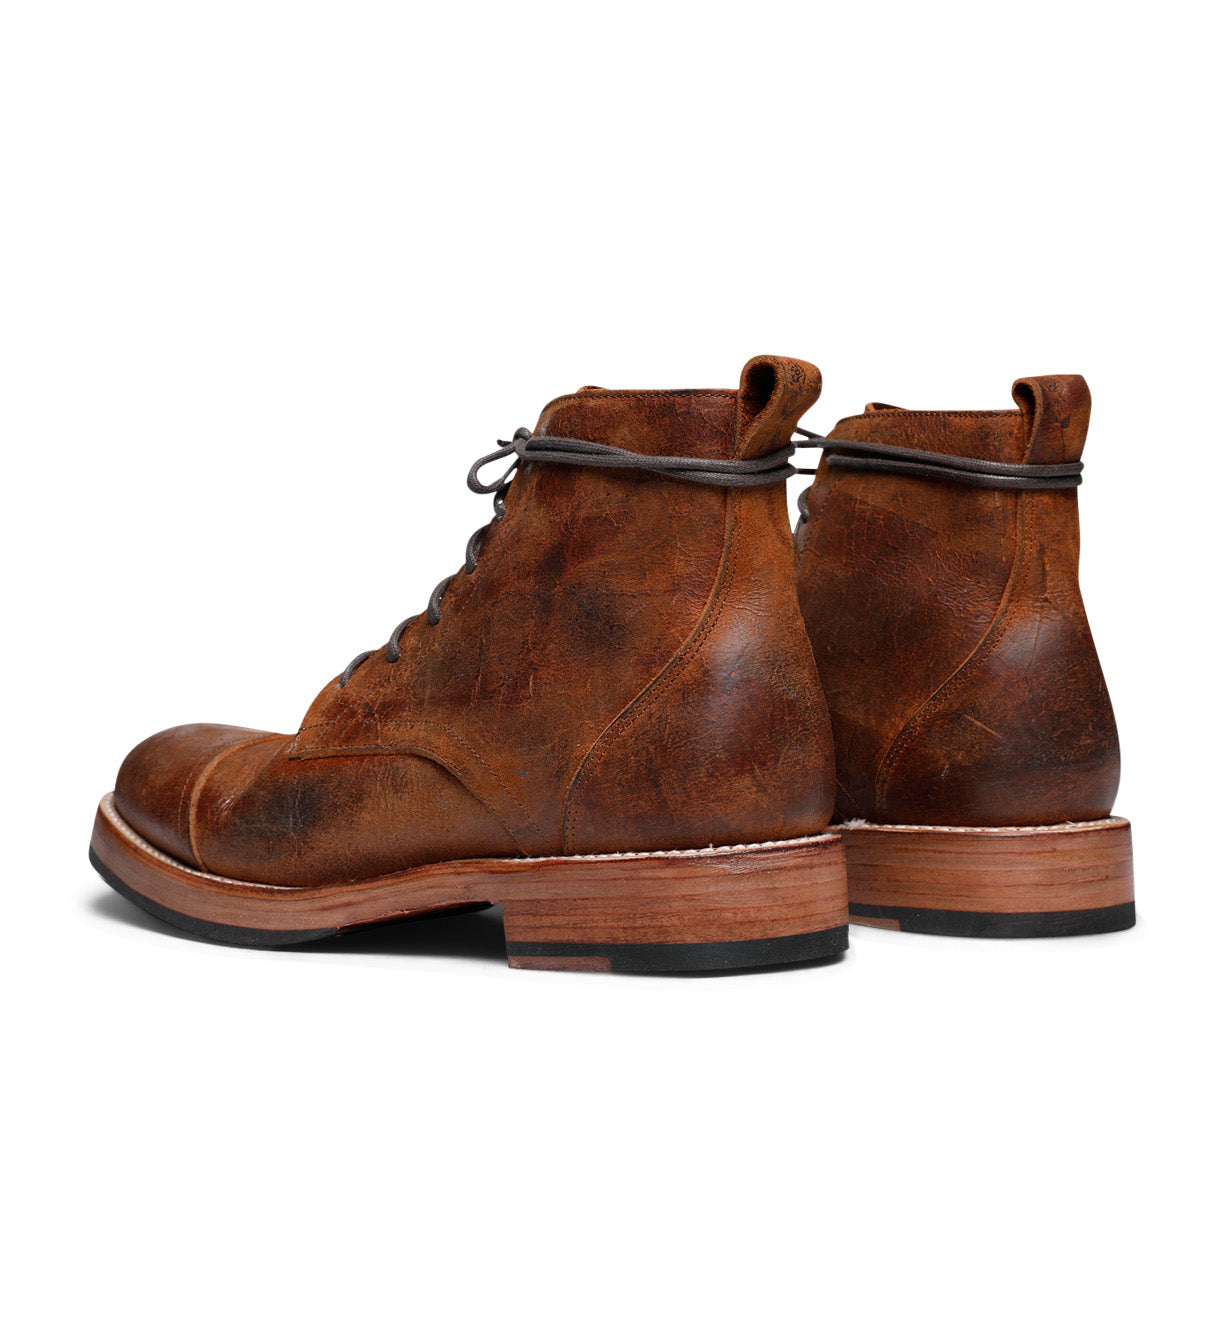 A pair of brown leather Santa Rosa Brand Larry boots from the Santa Rosa collection against a white background.